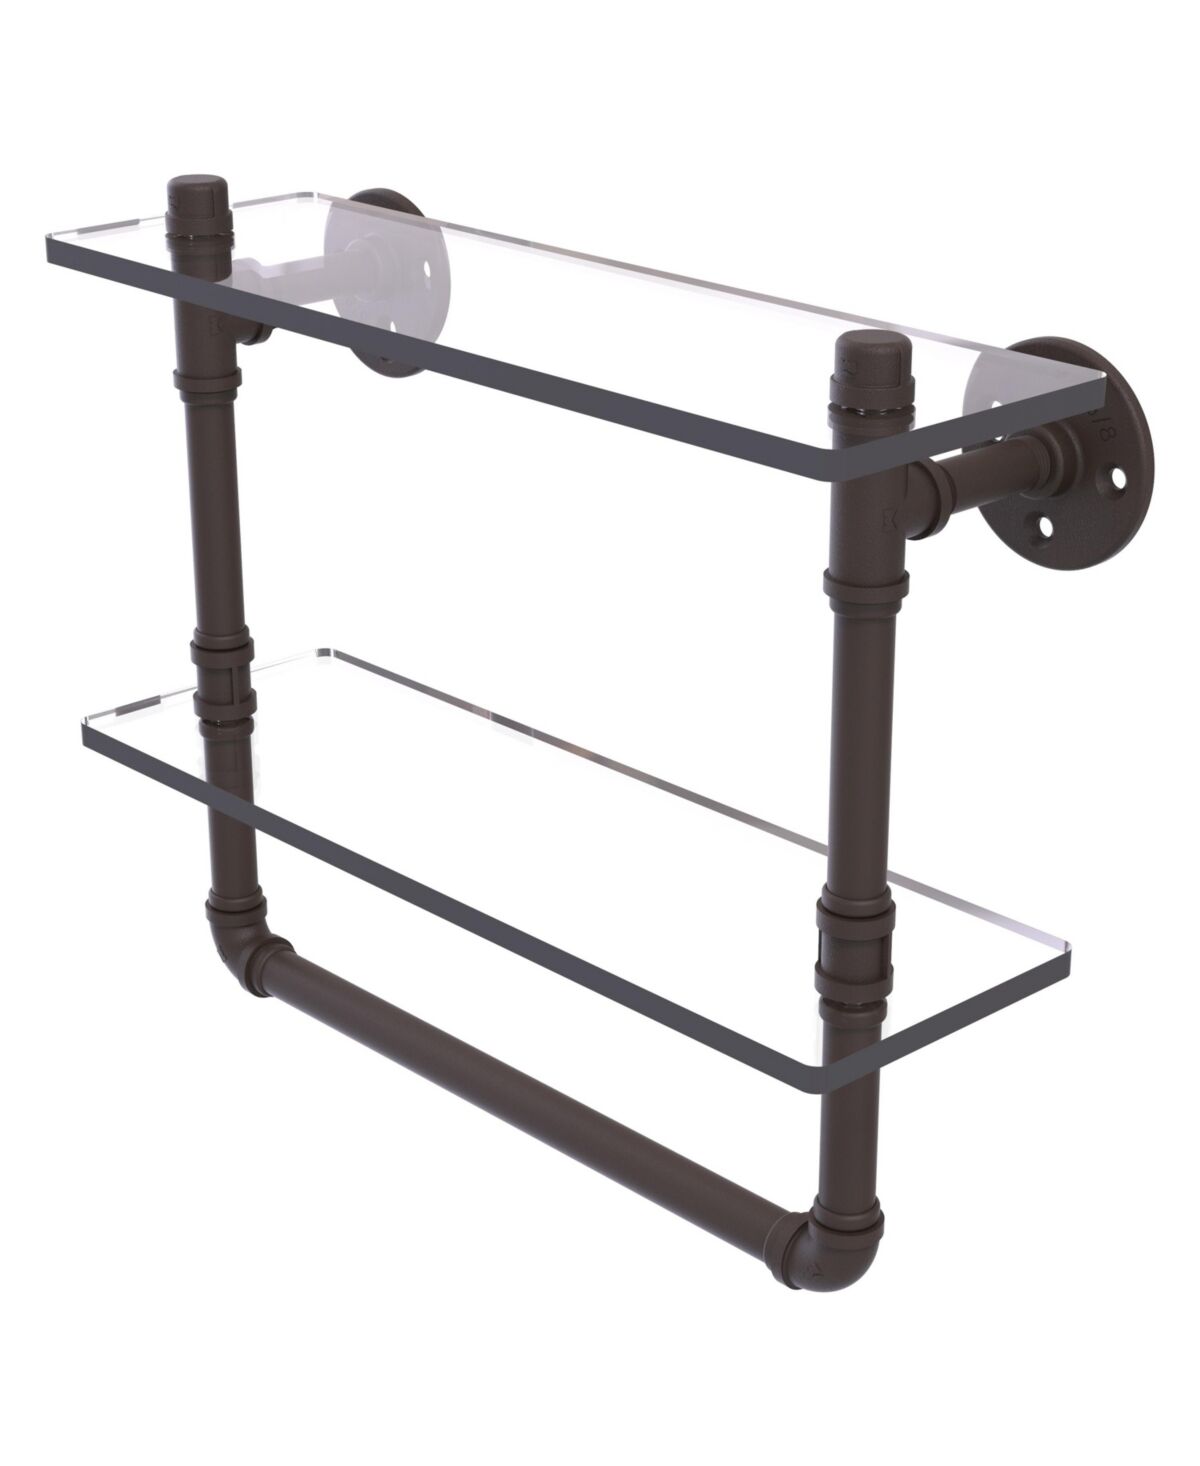 Allied Pipeline Collection 16 Inch Double Glass Shelf with Towel Bar - Oil rubbed bronze